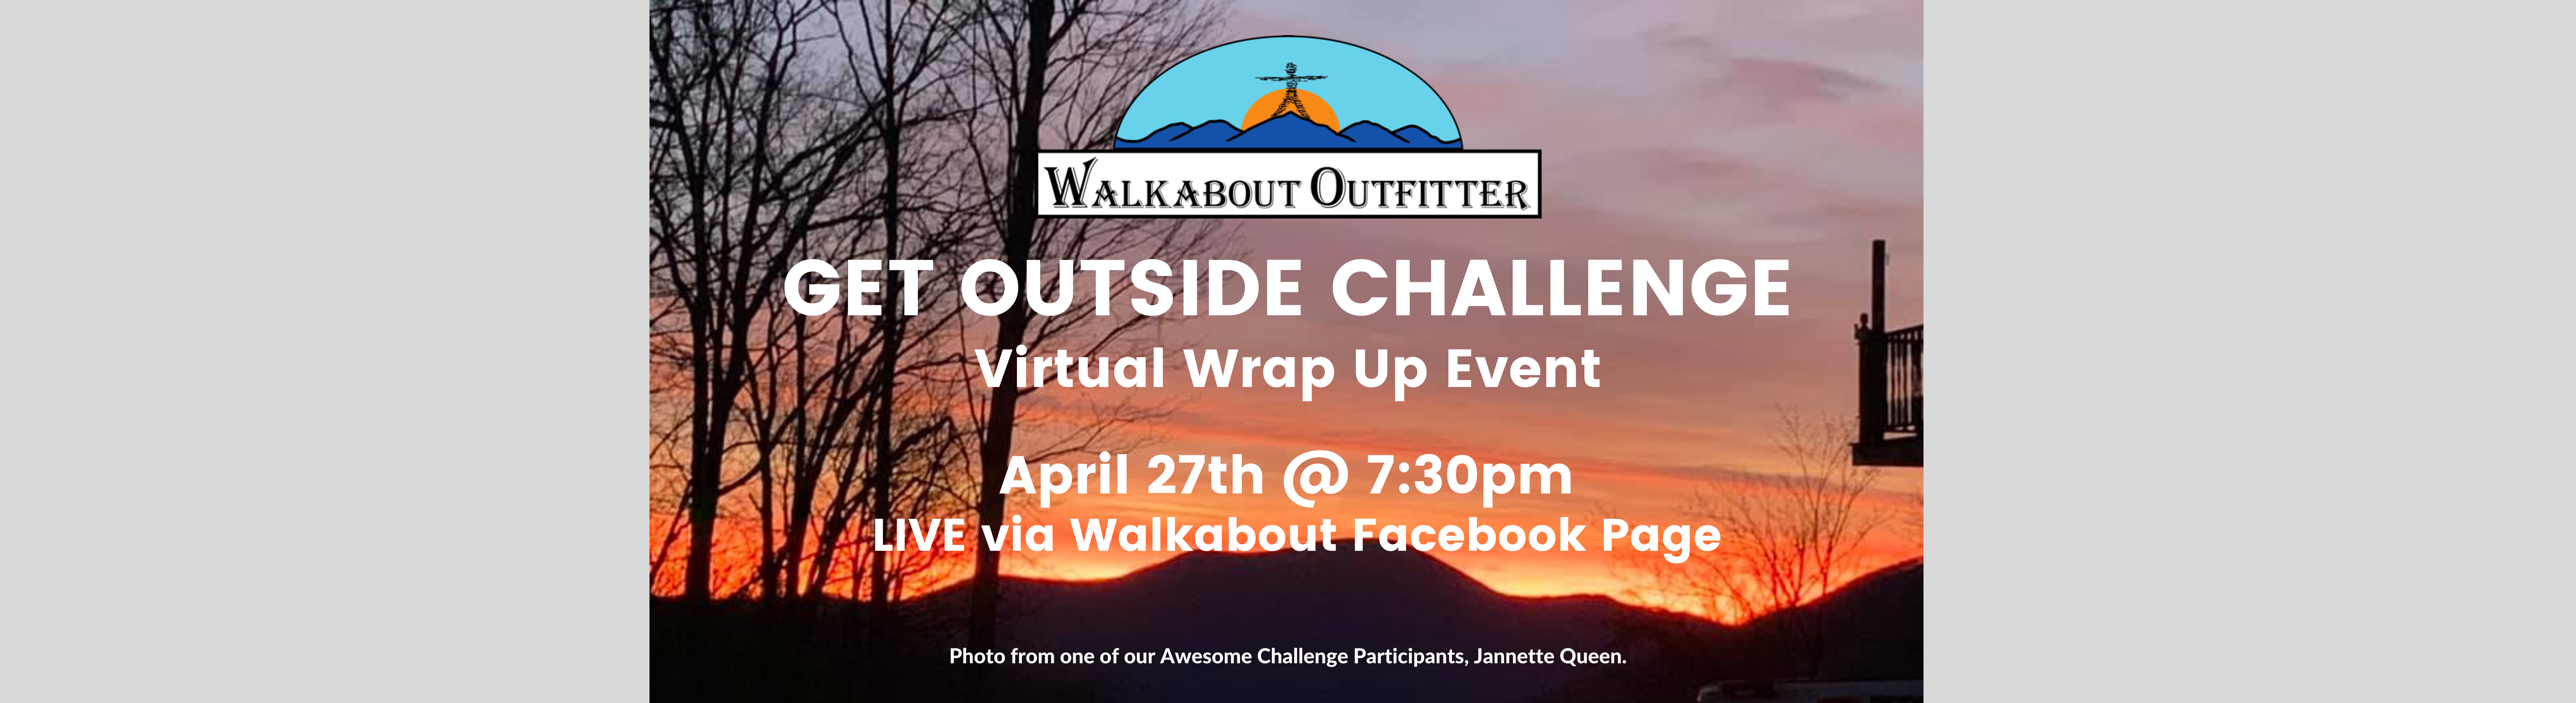 Get Outside Challenge Wrap Up Event - April 27th @ 7:30pm